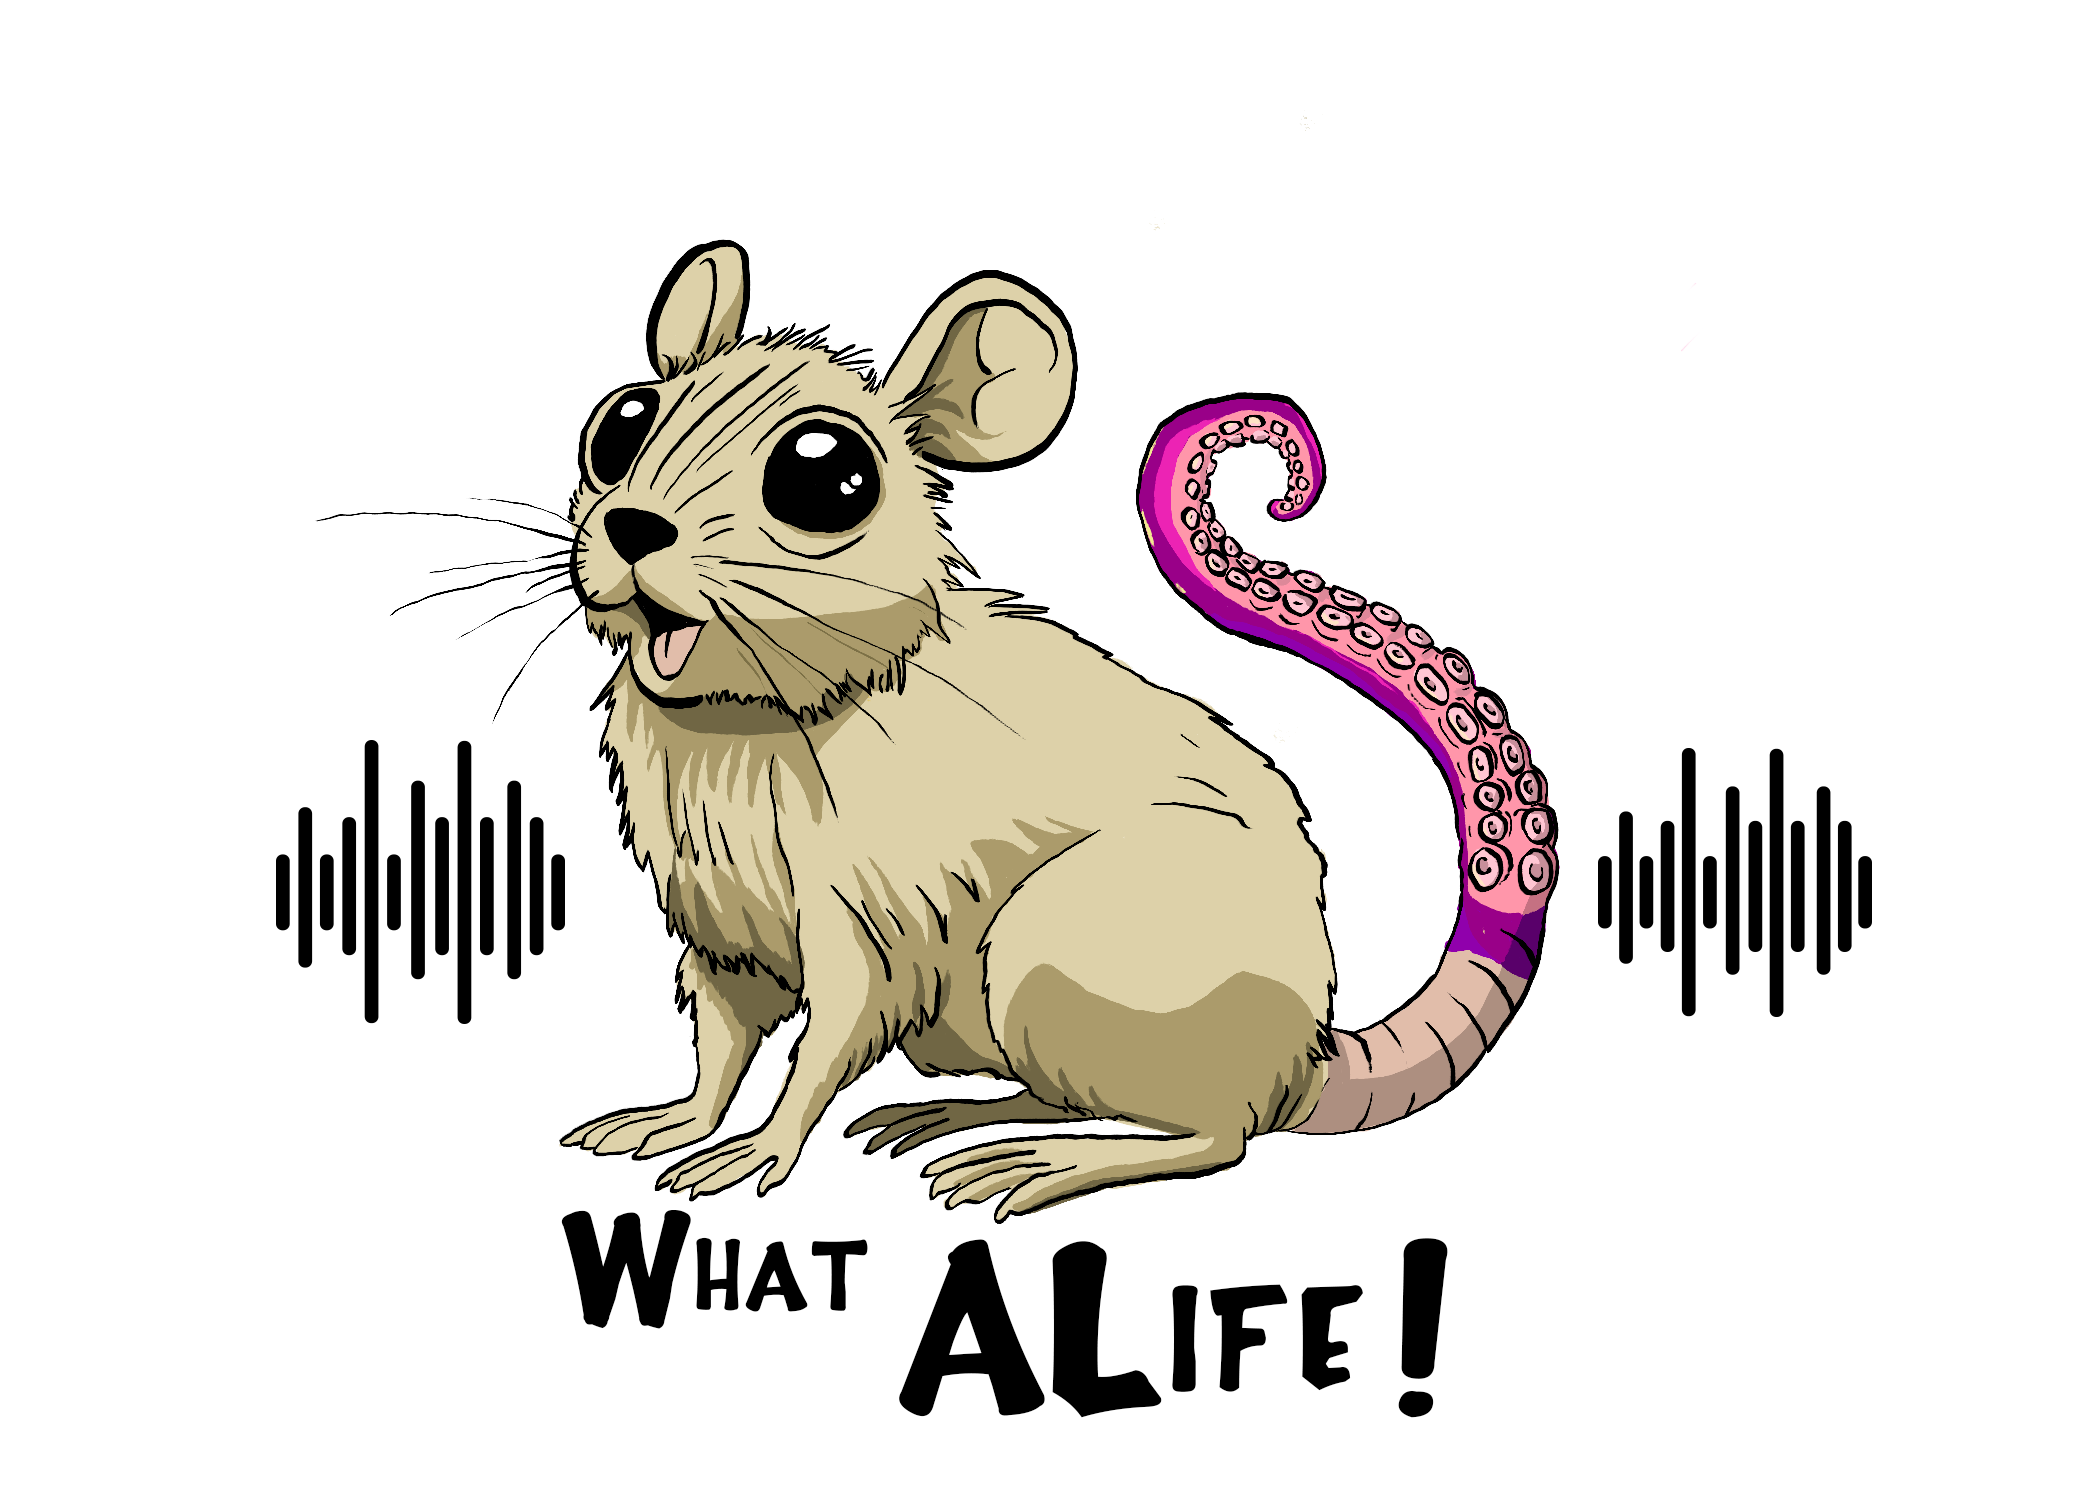 WhatALife! Podcast cover image)